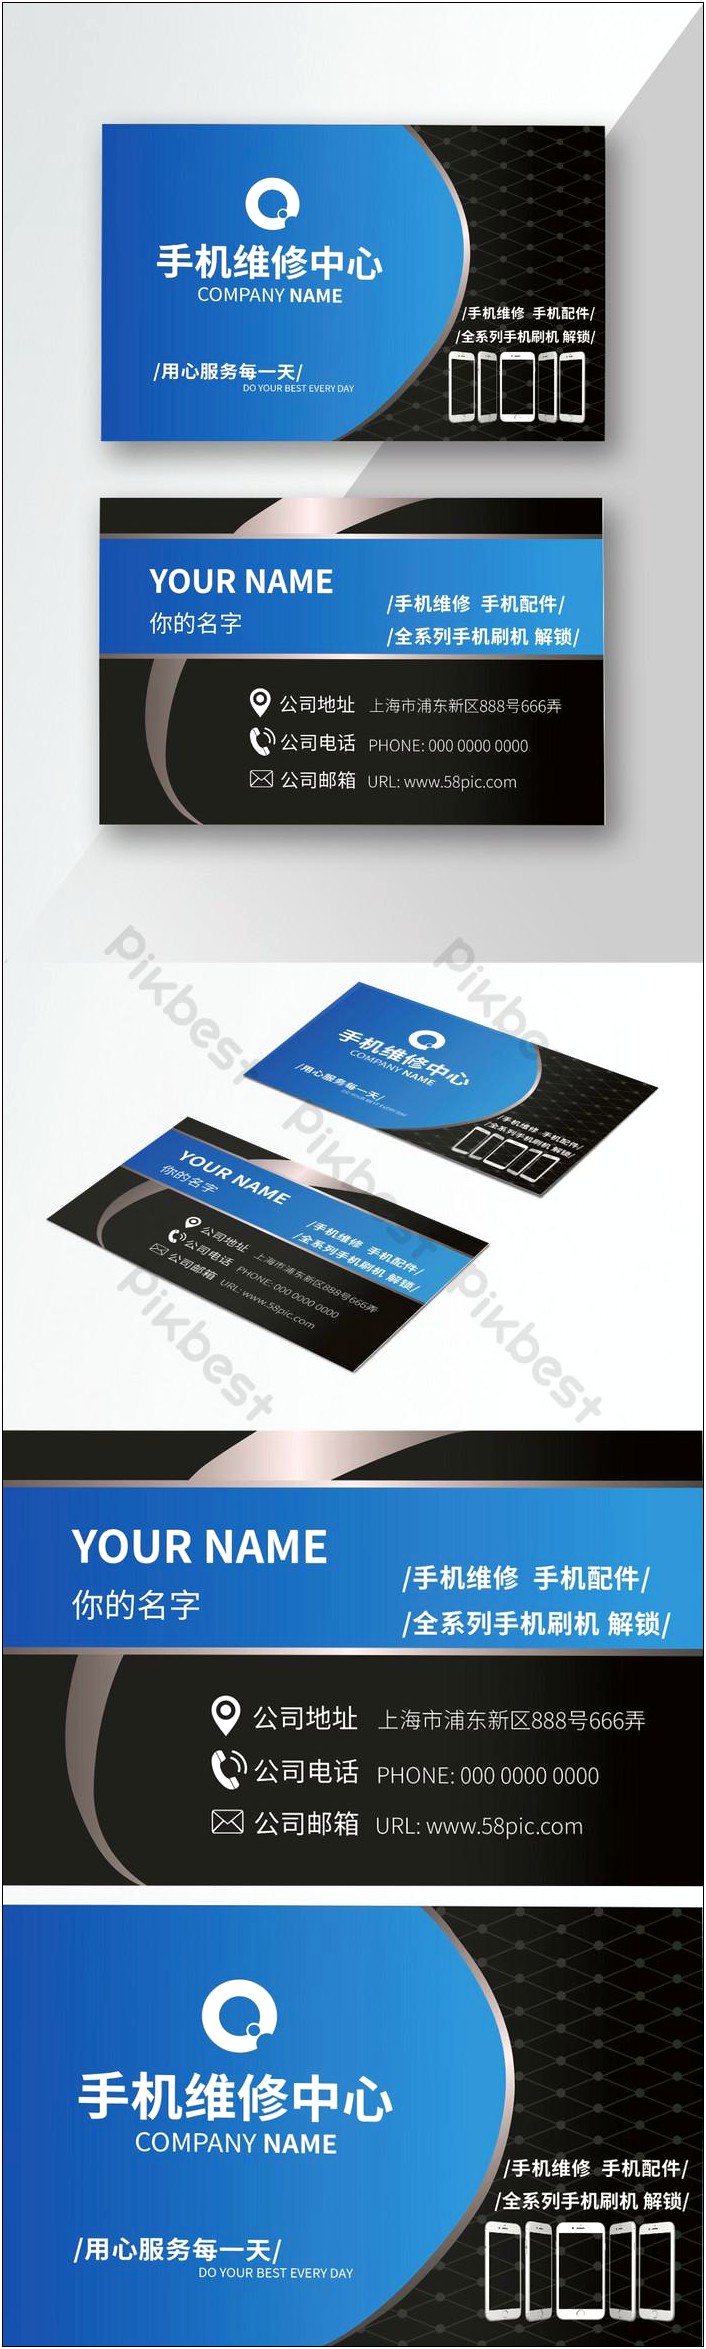 Cell Phone Repair Business Card Template Free